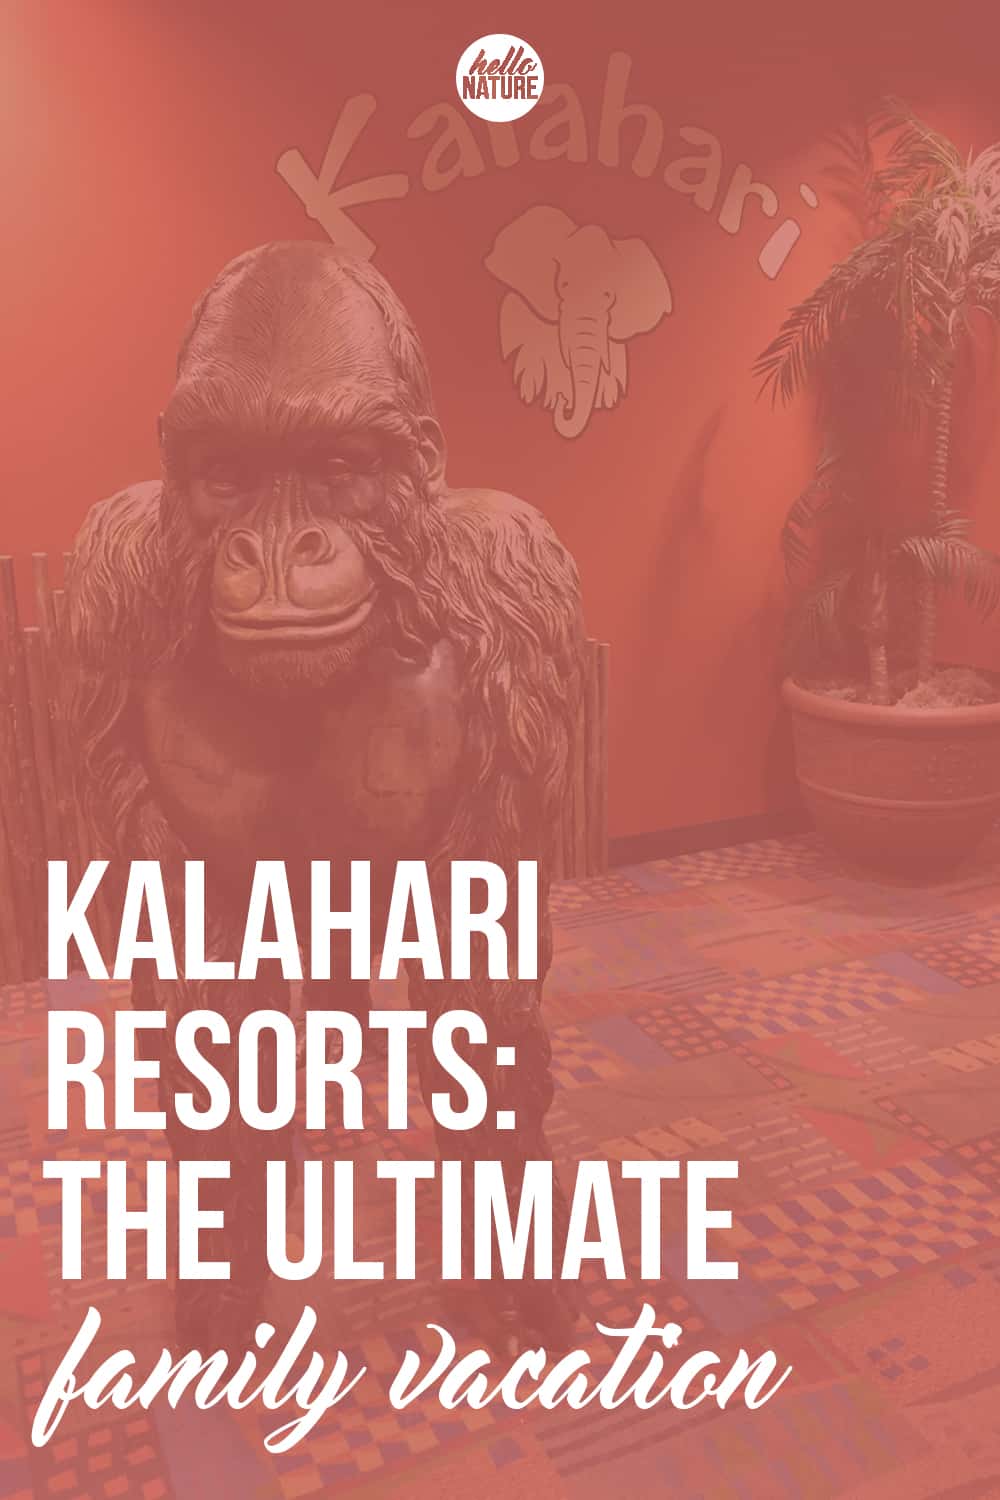 Not sure where to go for your next family trip? Kalahari Resorts are the ultimate family vacation! They've got something for everyone!